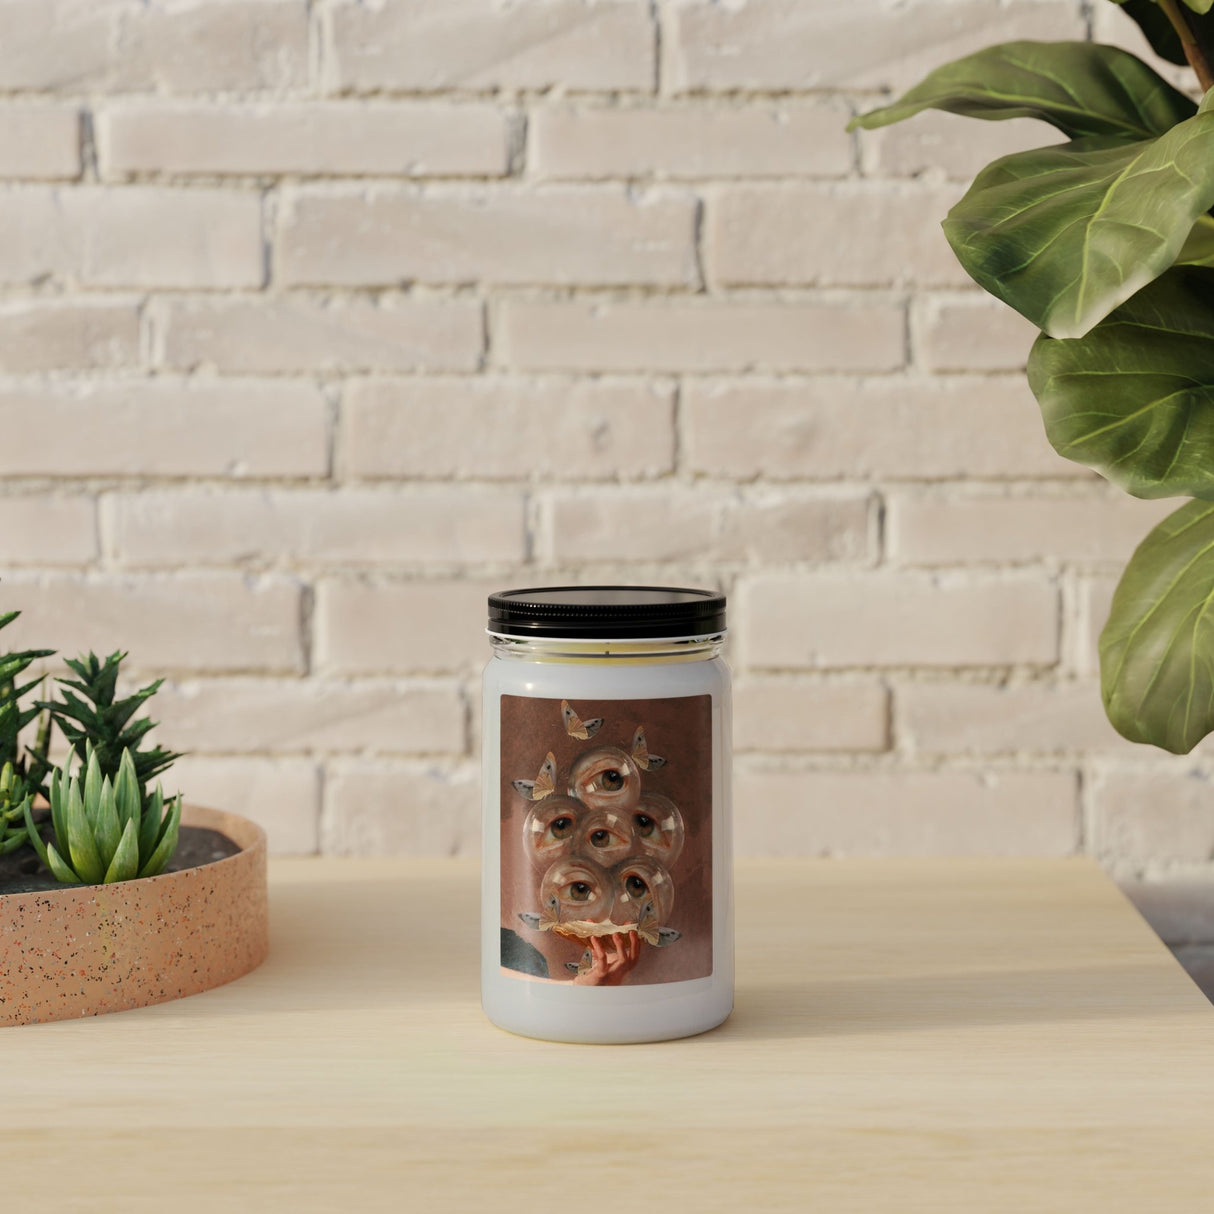 Welder Wings Scented Candle in Mason Jar: The Purity - Candlefy